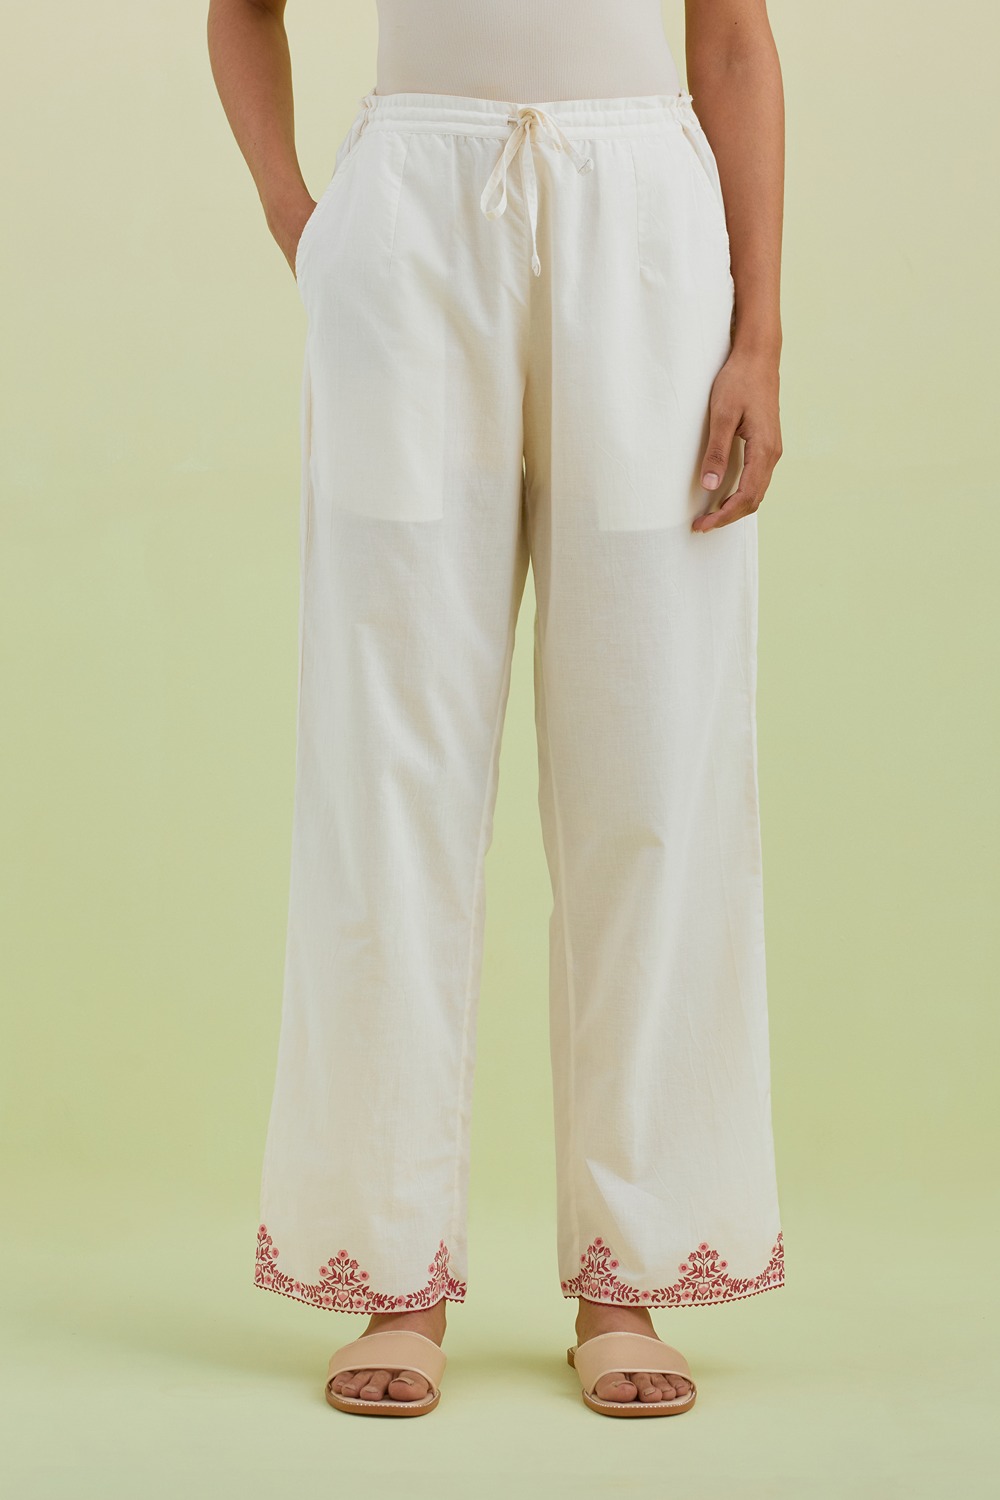 Off White Straight Pants With Pink Colored Hand-Block Printed Border At Hem